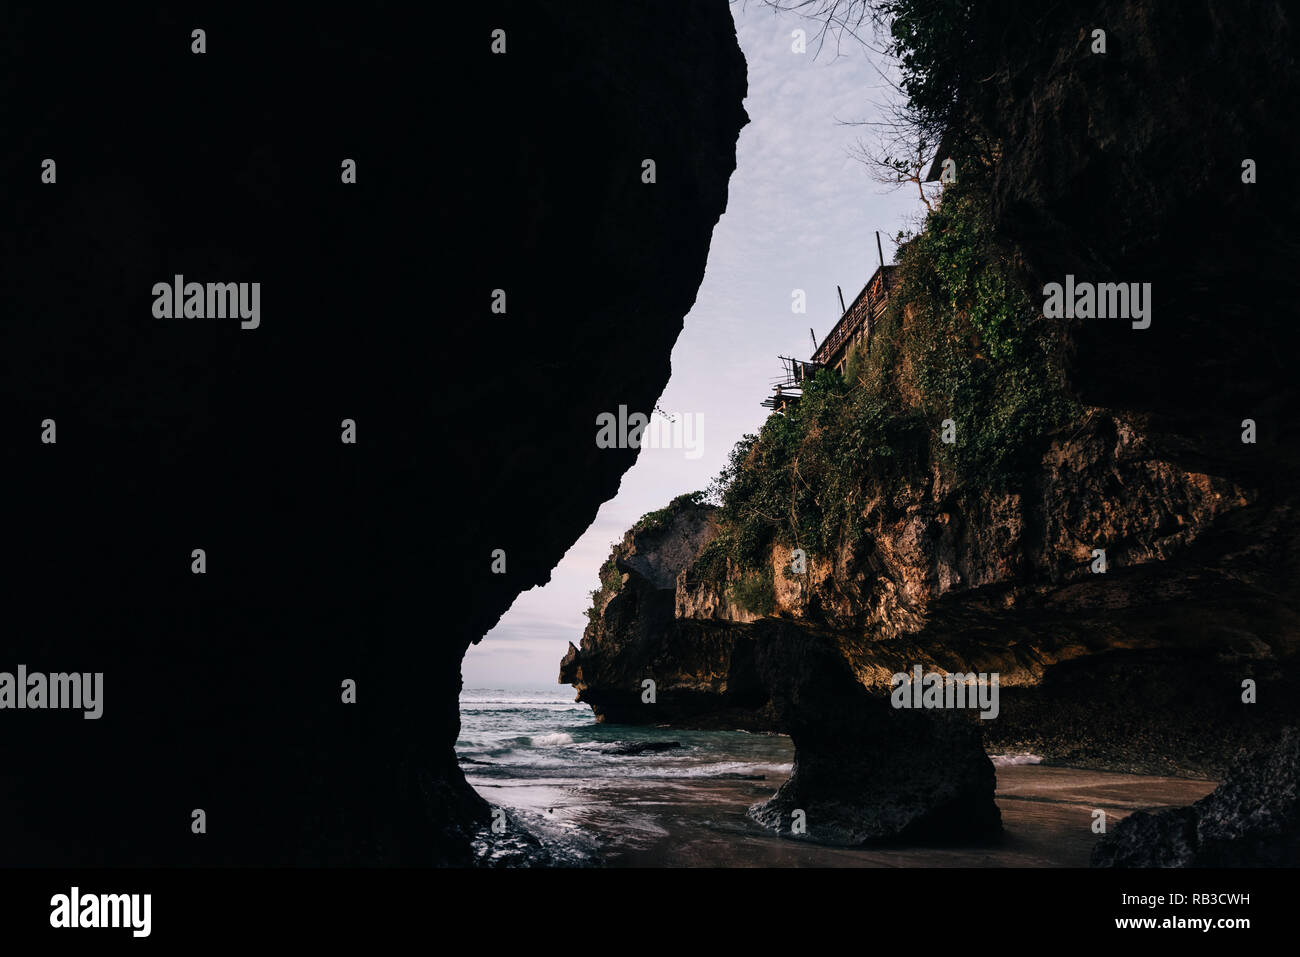 Lonely lagoon called Suluban Surf Beach on Bali, Indonesia. Low tide beach in the evening dawn with blue water and yellow sand with cliffs around Stock Photo